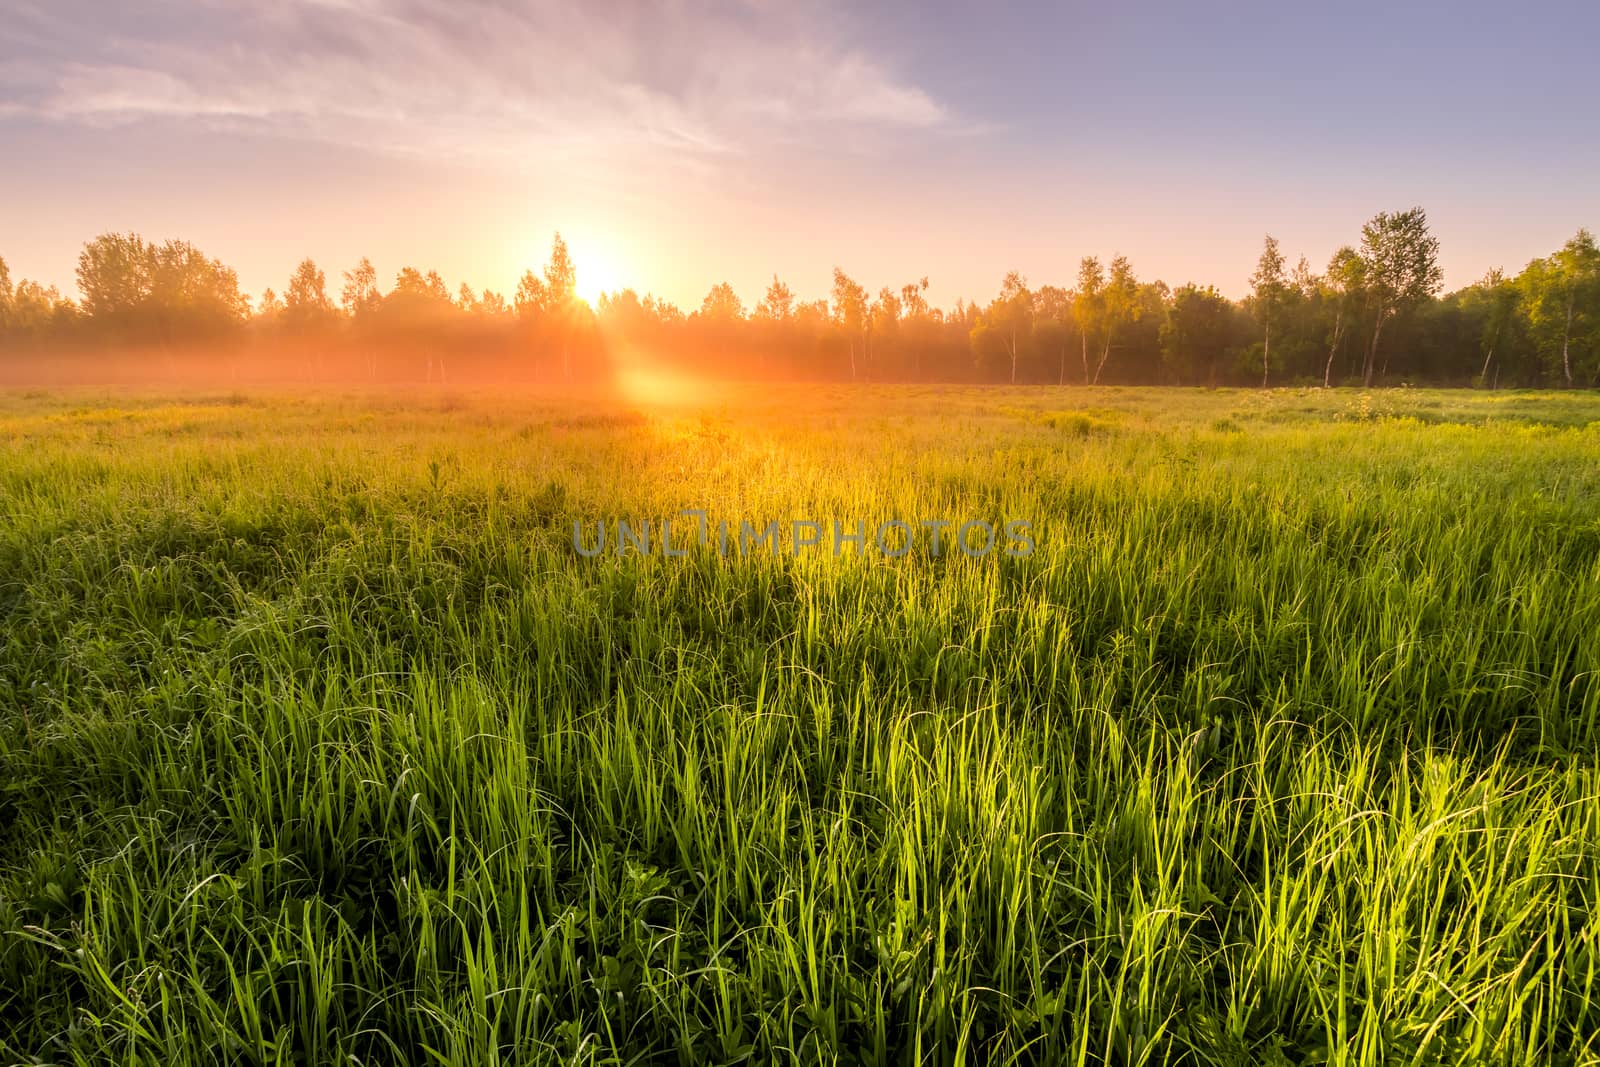 Sunrise or sunset in a spring field with green grass covered with a dew, fog, birch trees and clear bright sky. Landscape.